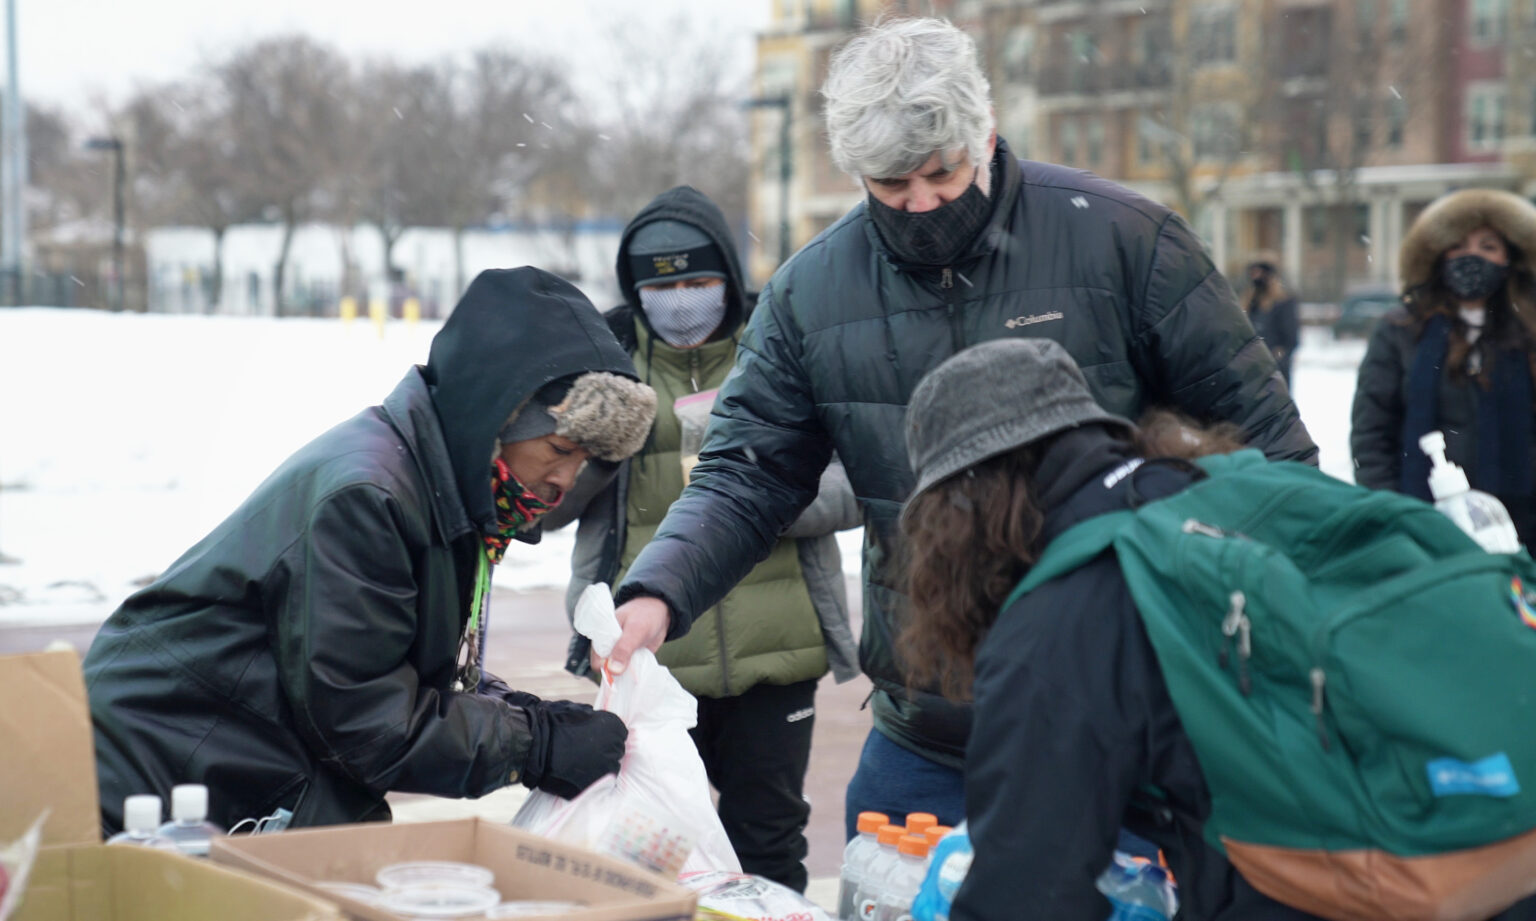 Volunteers sort food and clothing during a Justice for Jacob Blake, antifascist mutual aid action event at McPike Park in Madison.